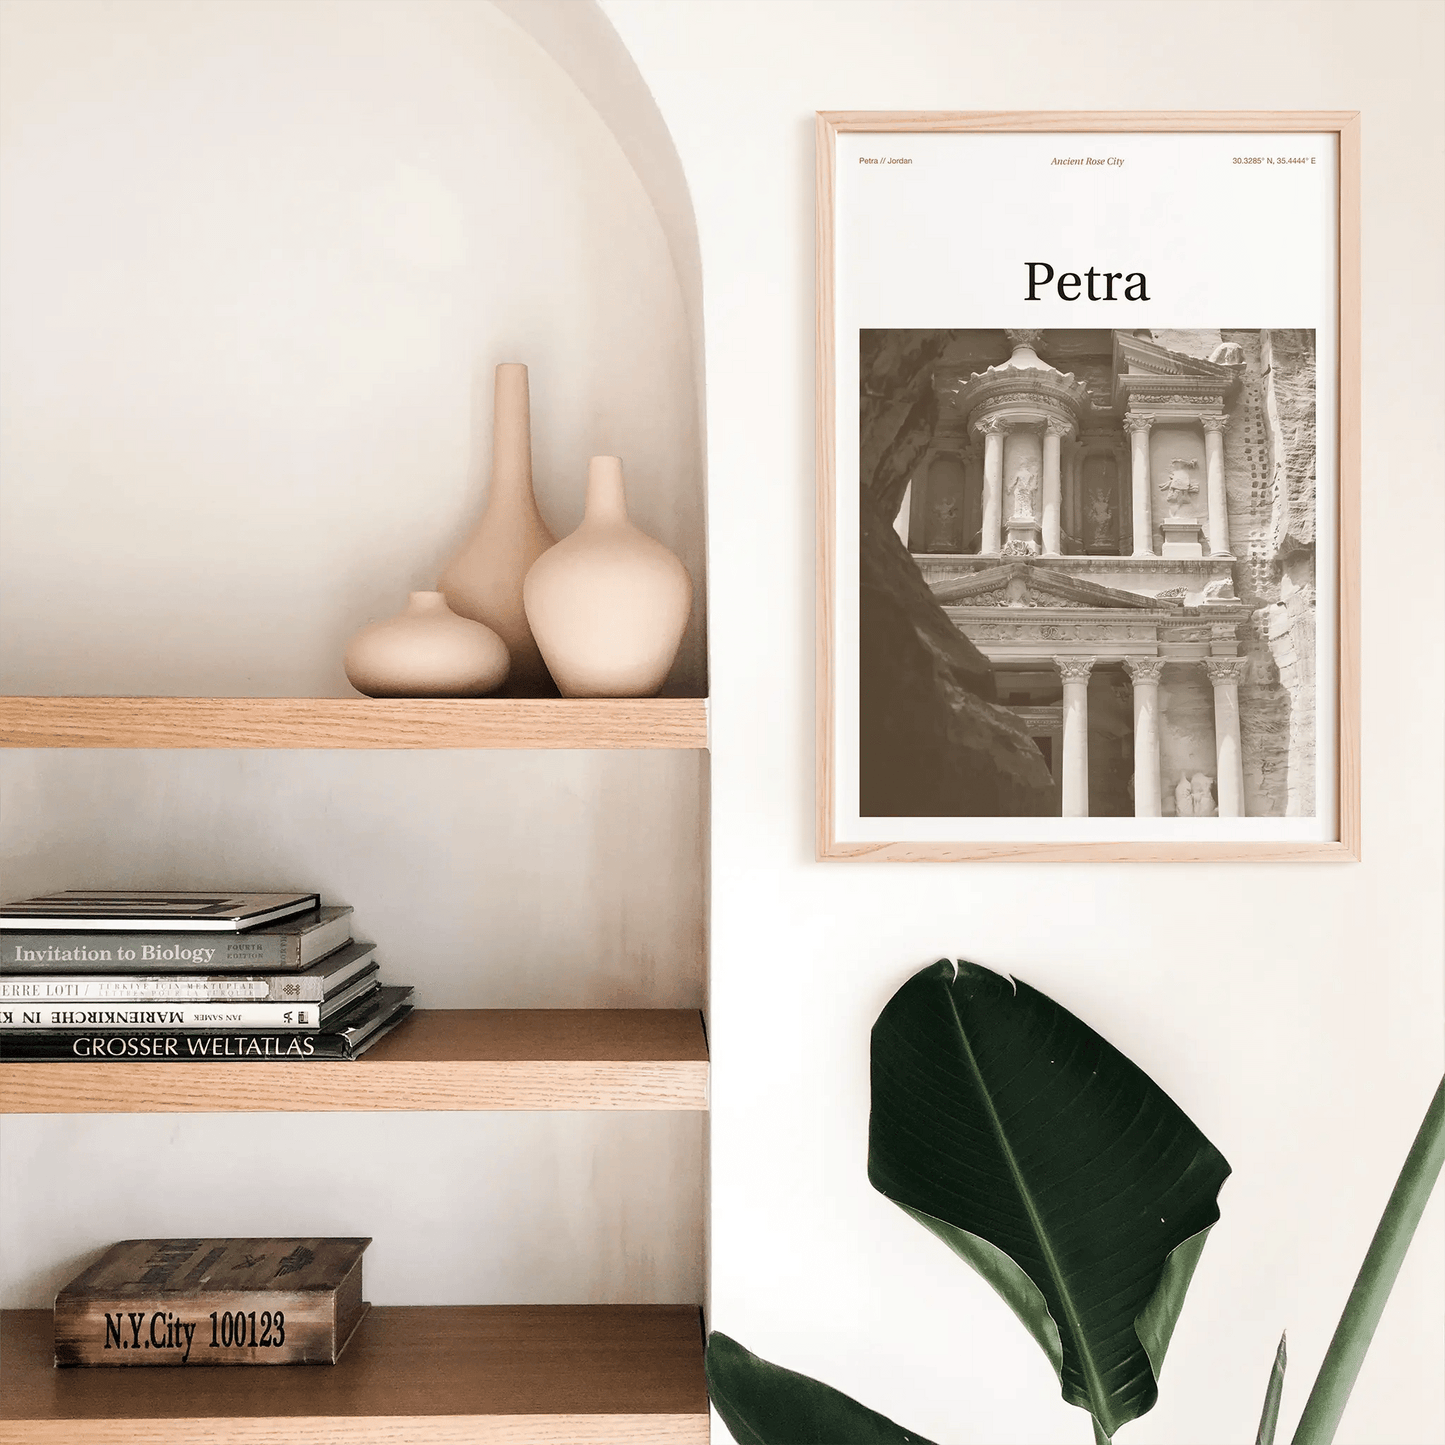 Petra Essence Poster - The Globe Gallery